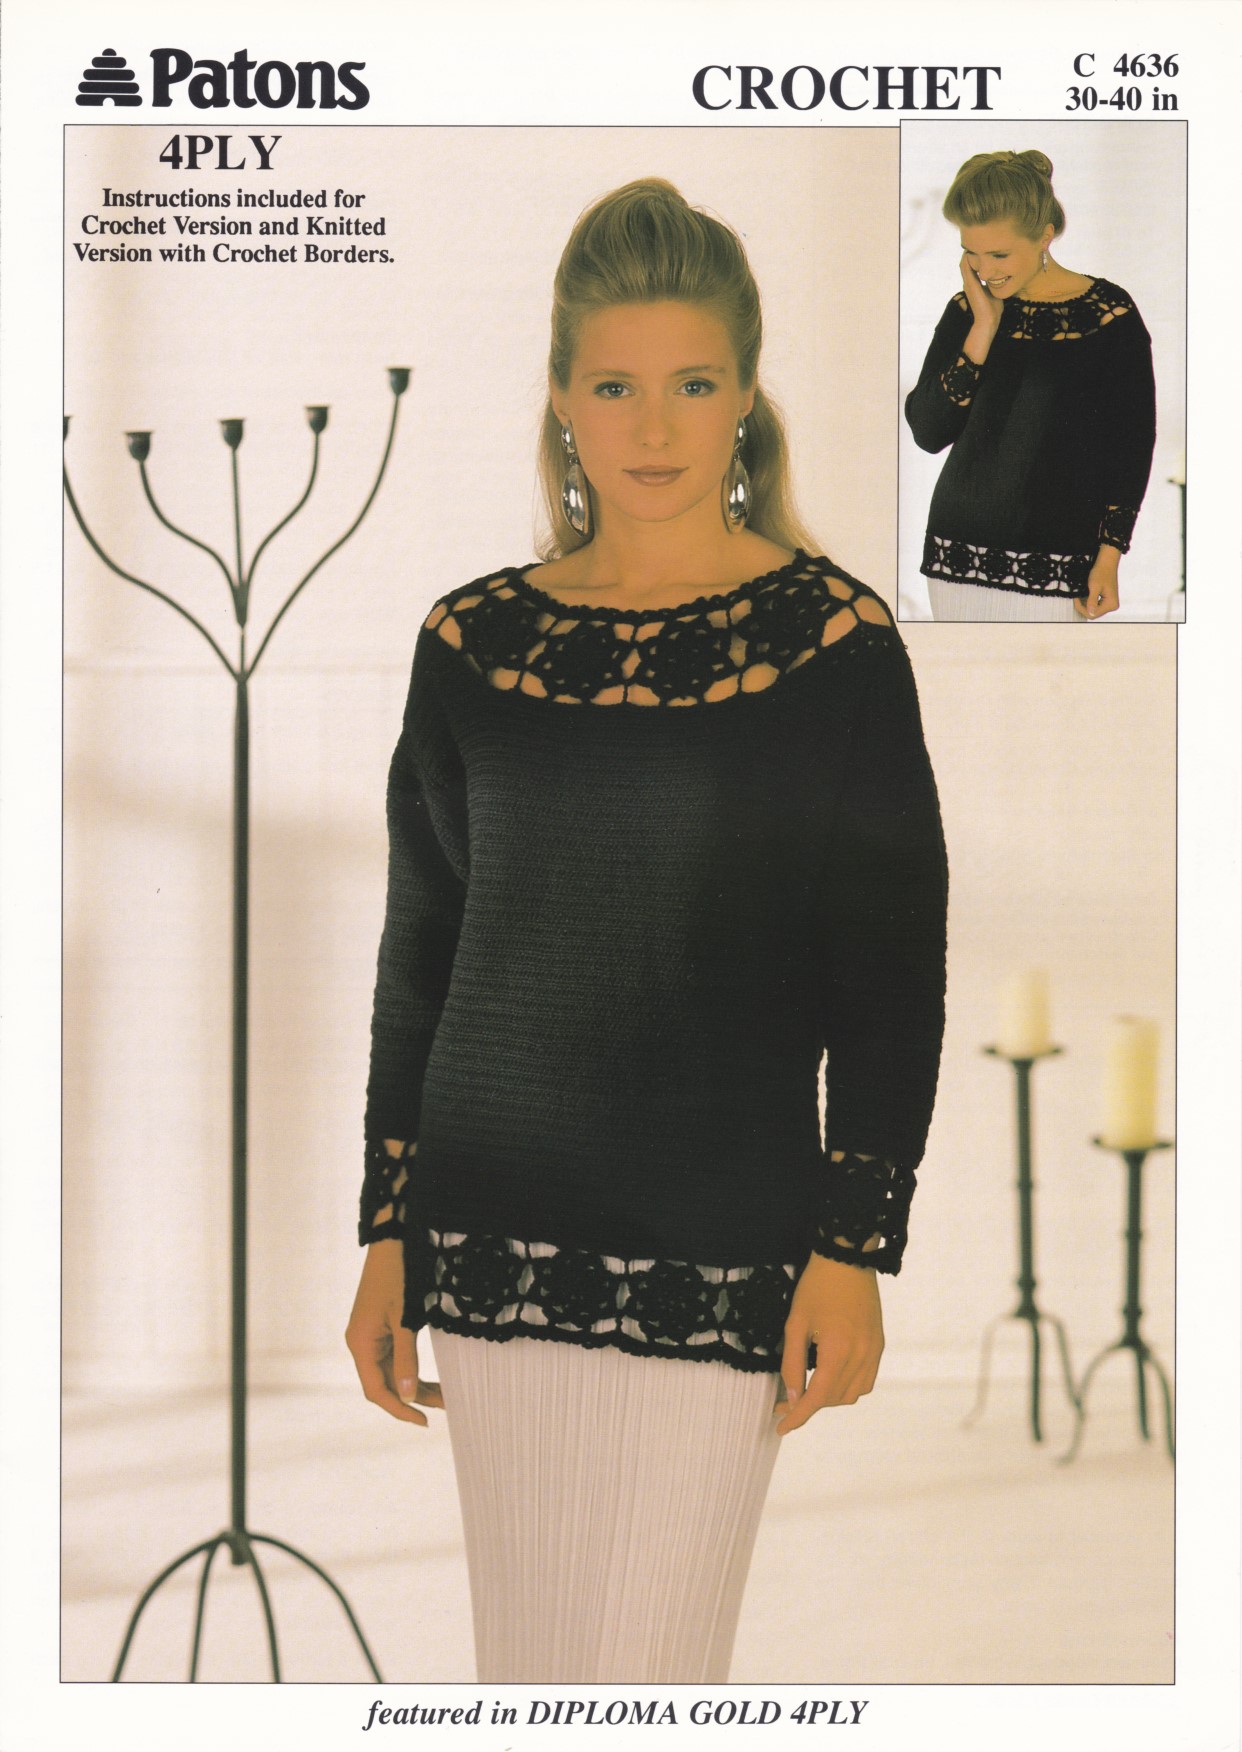 Crochet pattern leaflet showing lady wearing crochet top with open stars across the neck, cuff and welt borders.